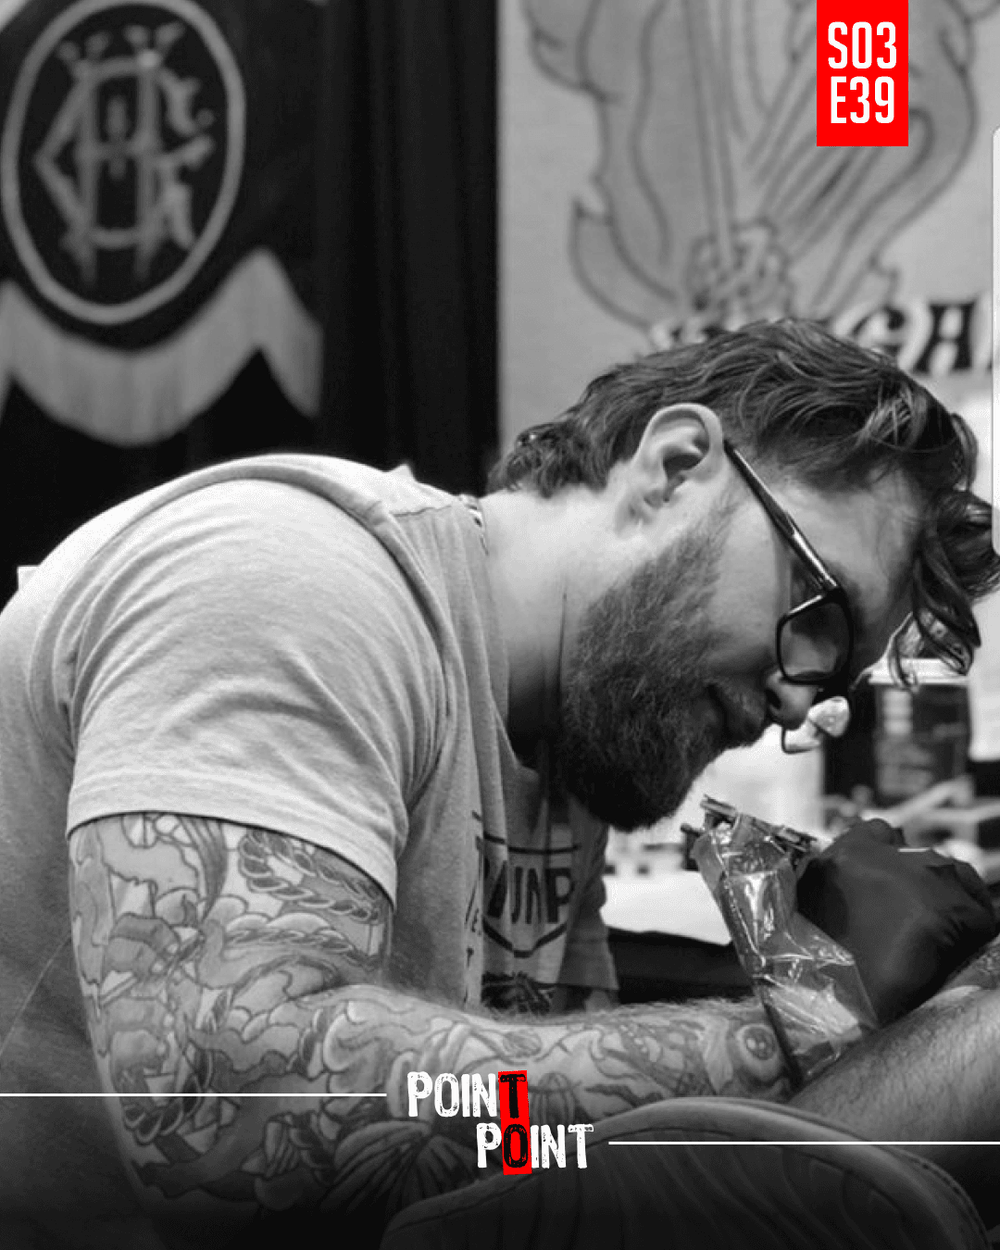 Jason McMillan Talks Tattooing Philosophies, Self-Awareness...and Tattoos Of Course...Part Two